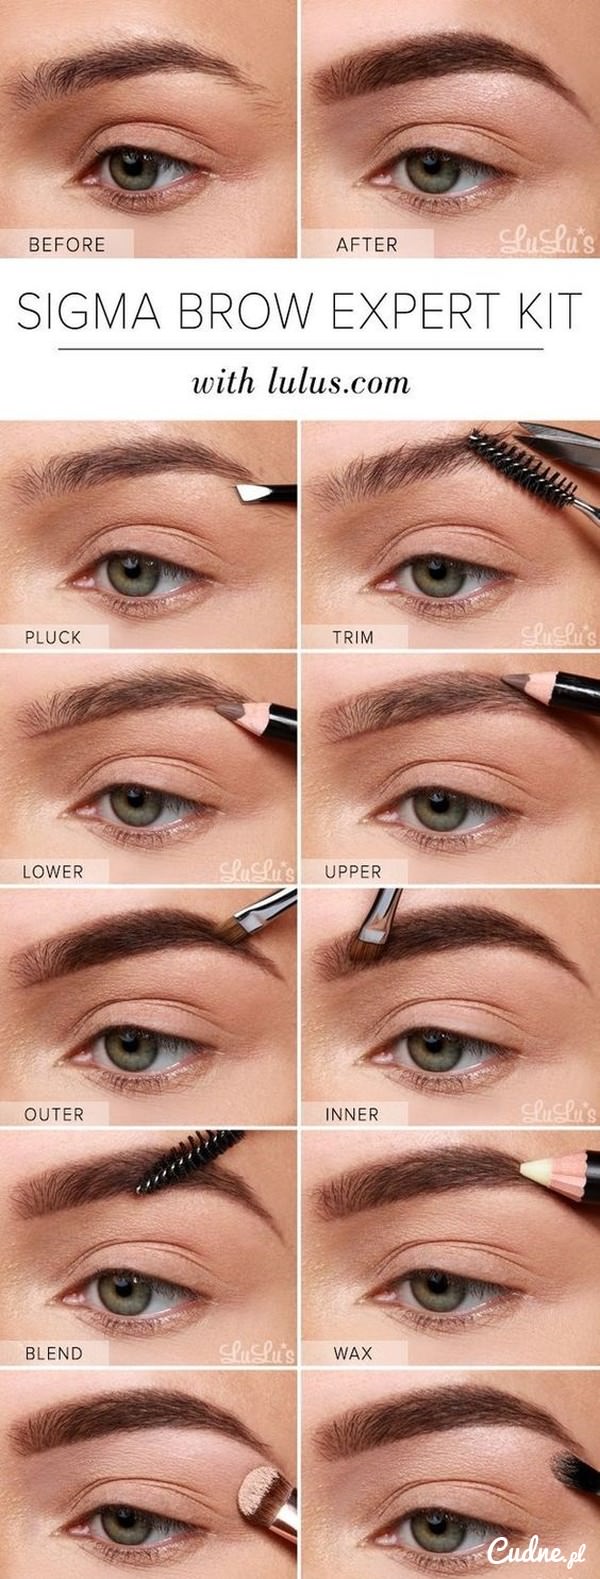 Here Are 10 Tips For Beginners That'll Make Your Eyebrows Fleeker Than Fleek.